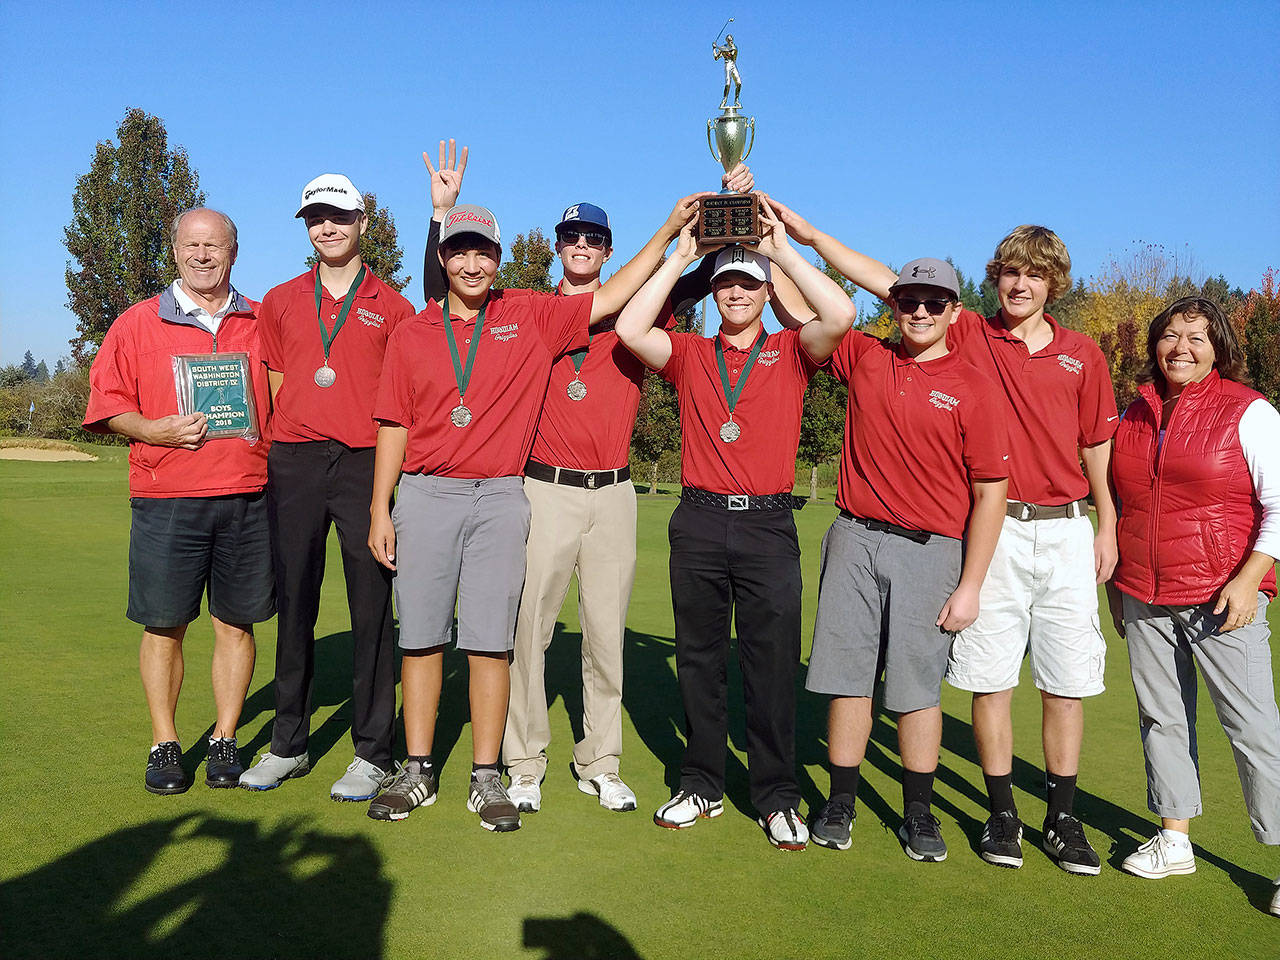 The Hoquiam boys golf team hoists the 1A District championship trophy on Friday in Tumwater. Pictured (left to right) are: Grizzlies head coach Larry DuBlanko, Tayte Witherbee, Michael Jump, Brayden Dayton, Josh Burgher, Noah Sudderth, Tyler Sundstrom and Patty Sundstrom. (Submitted photo)